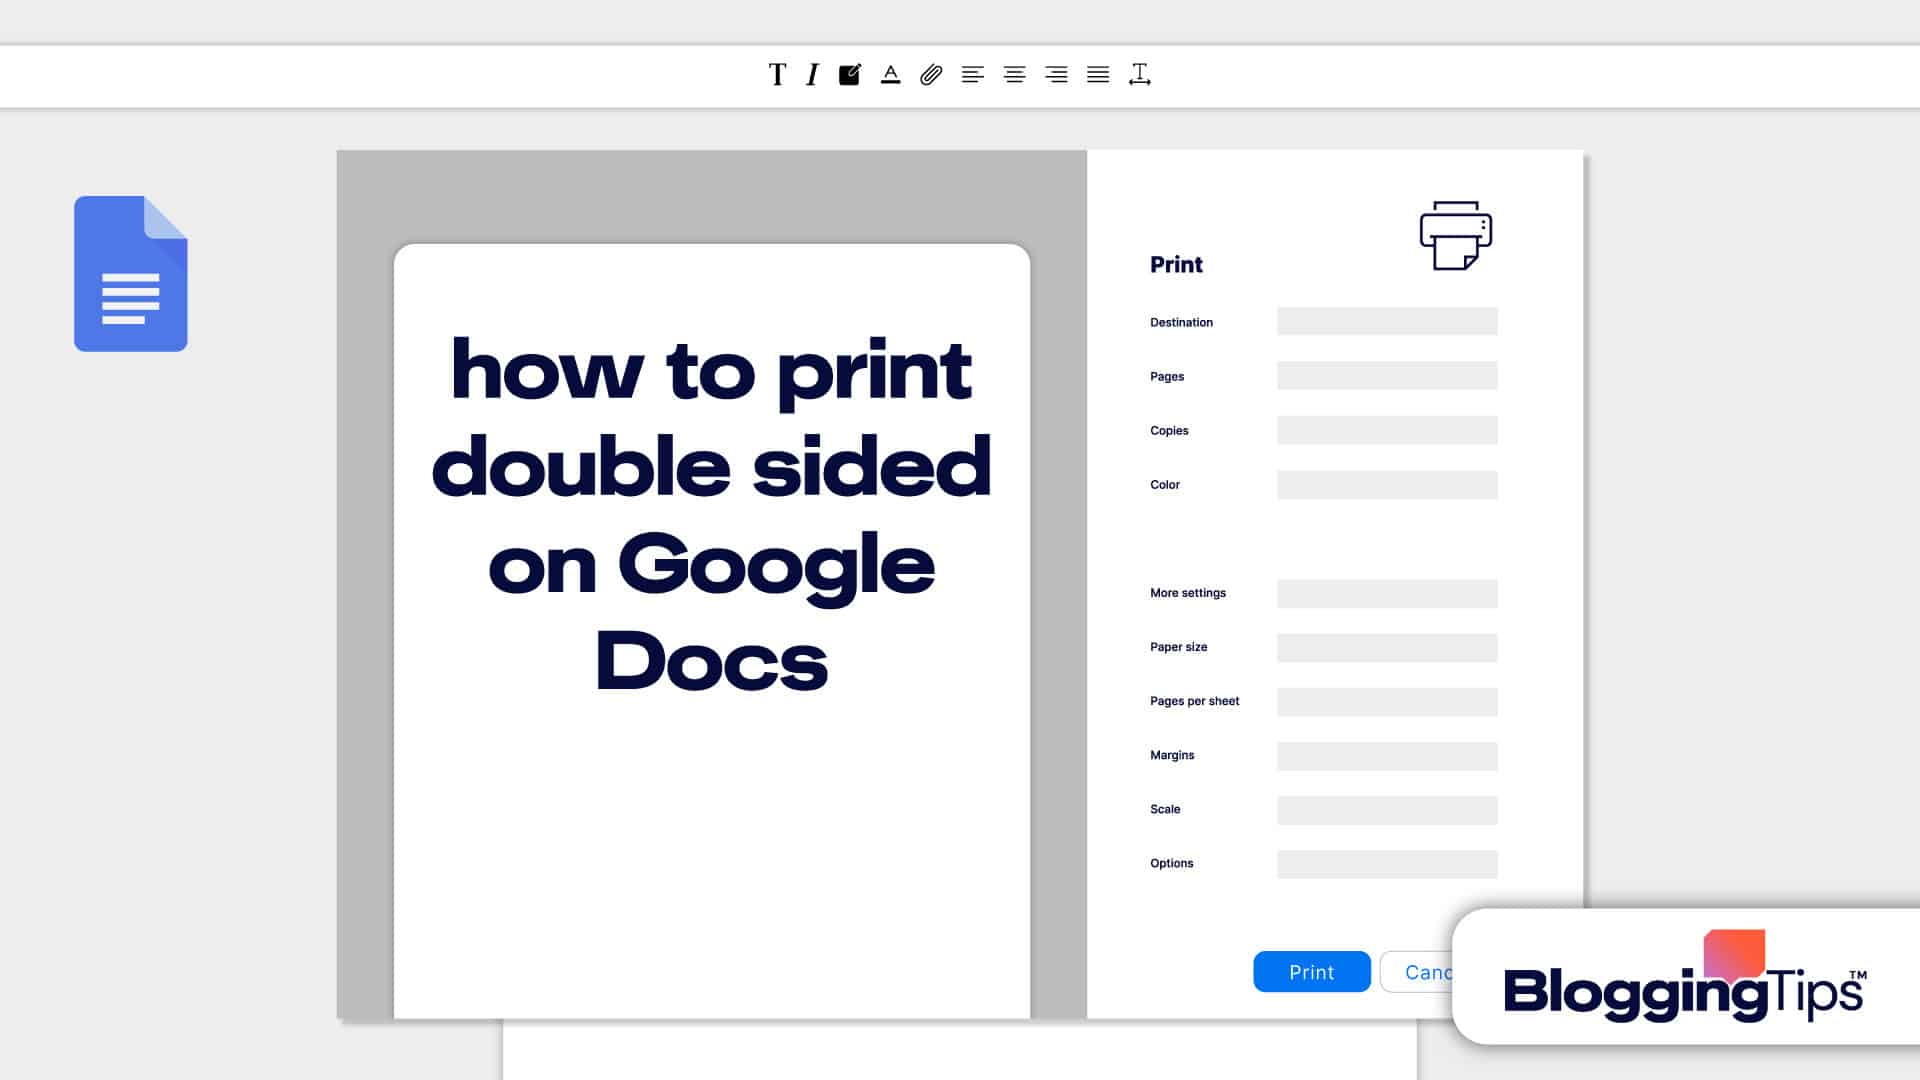 How To Print Double-Sided On Google Docs